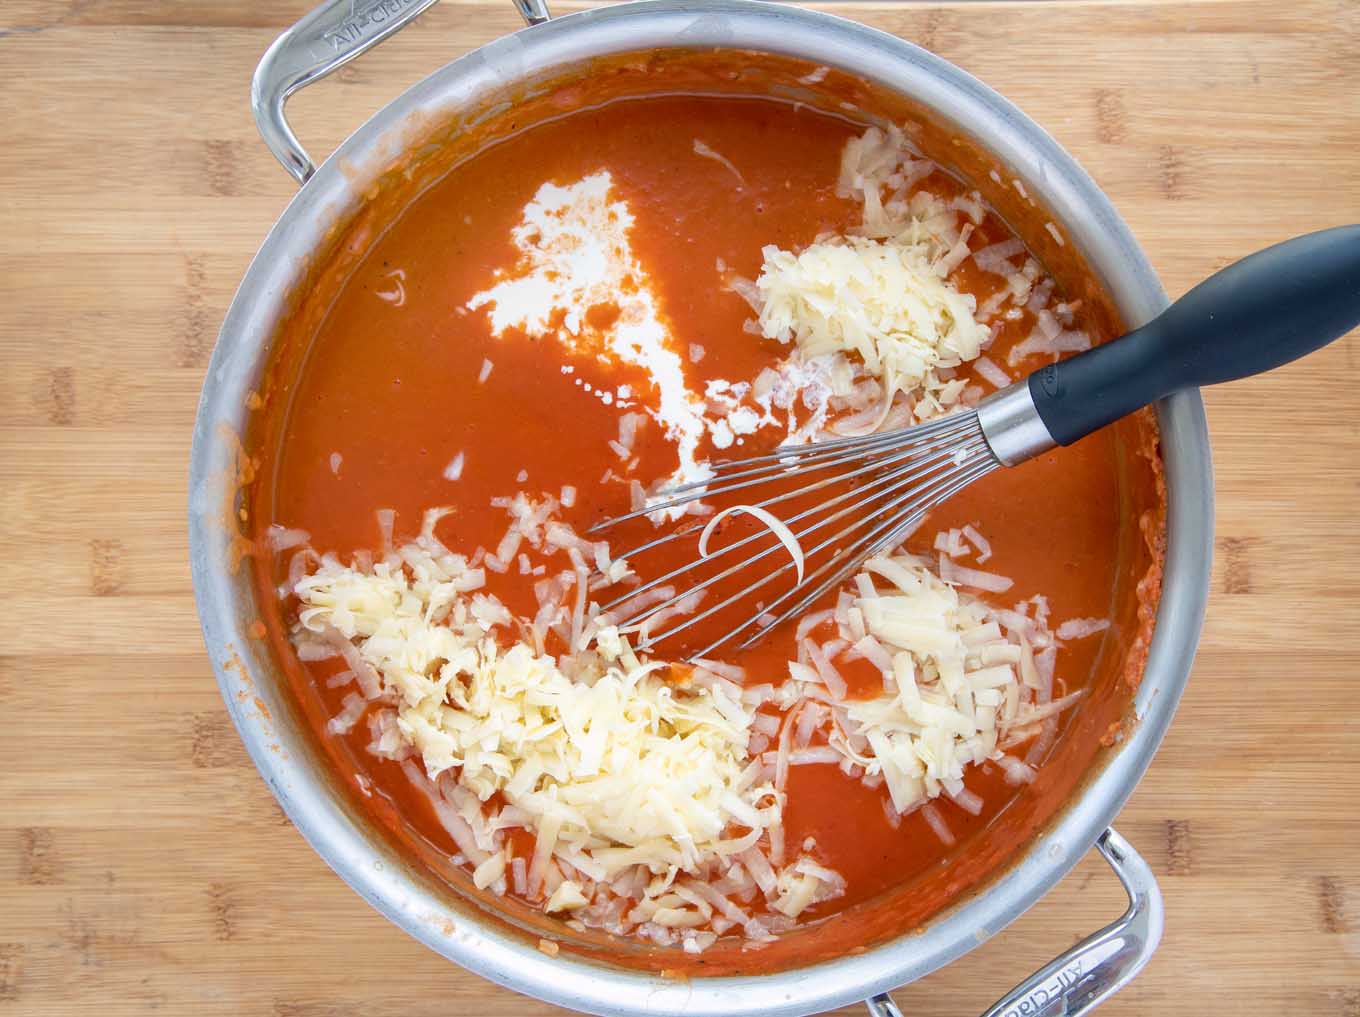 shredded cheddar and cream added to a big pot of tomato bisque